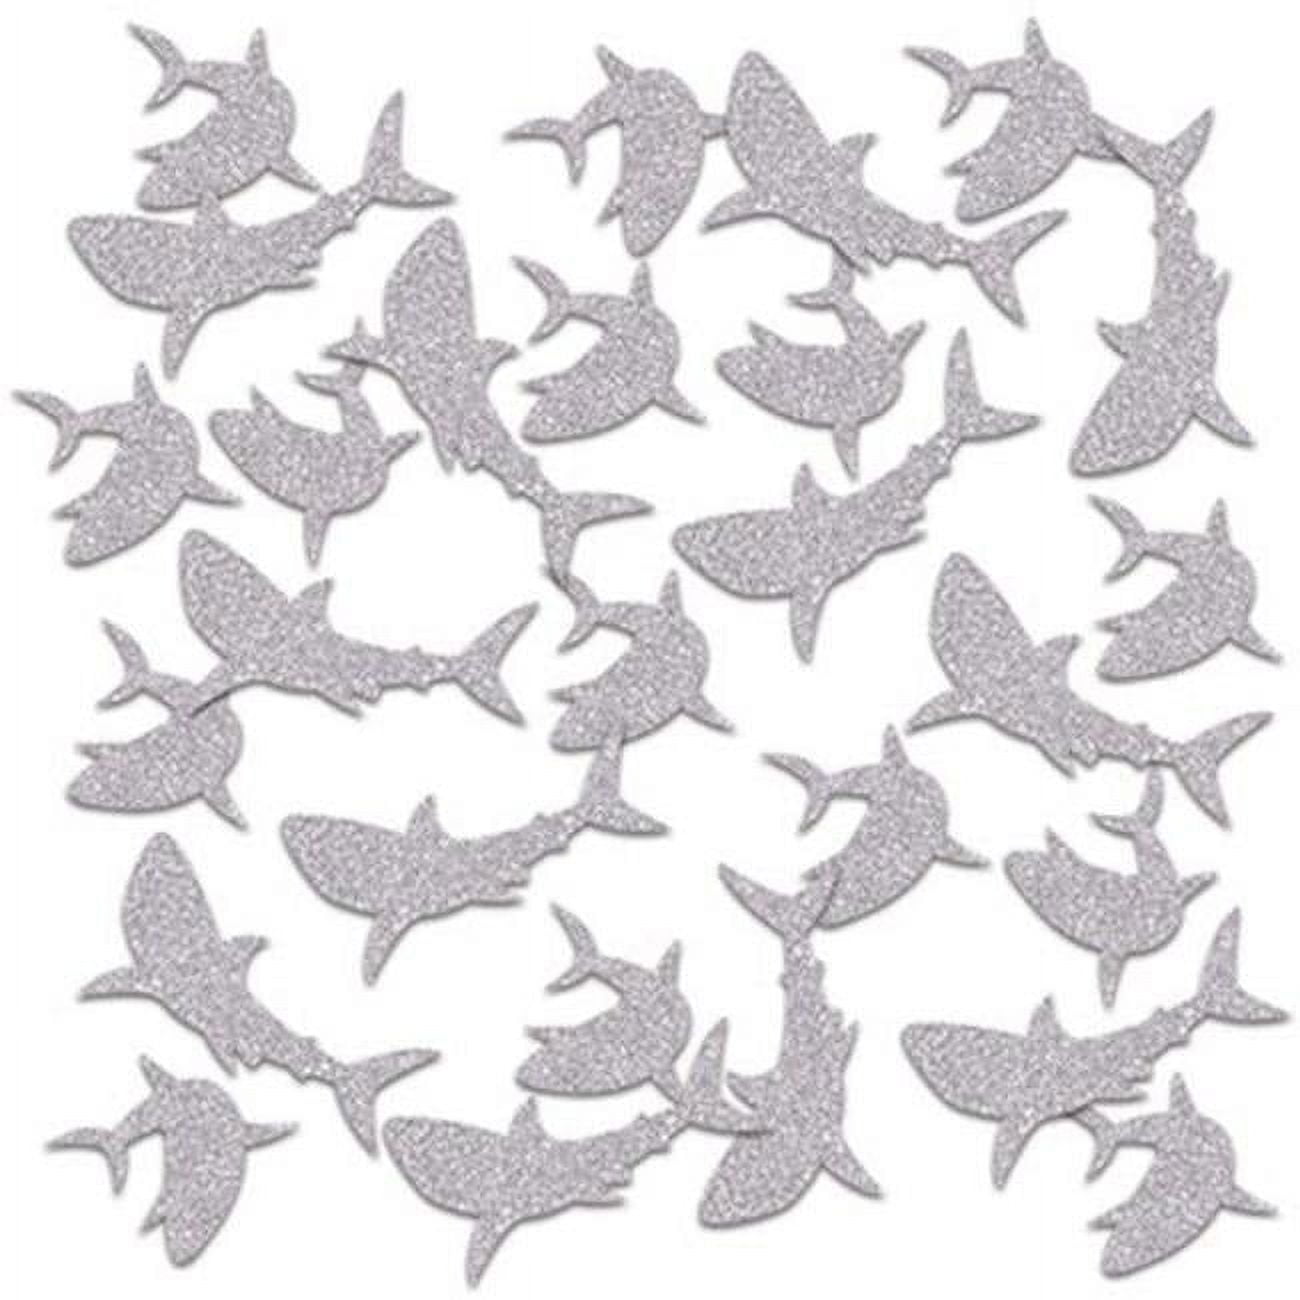 Picture of Beistle 53779 Shark Deluxe Sparkle Confetti - Pack of 12